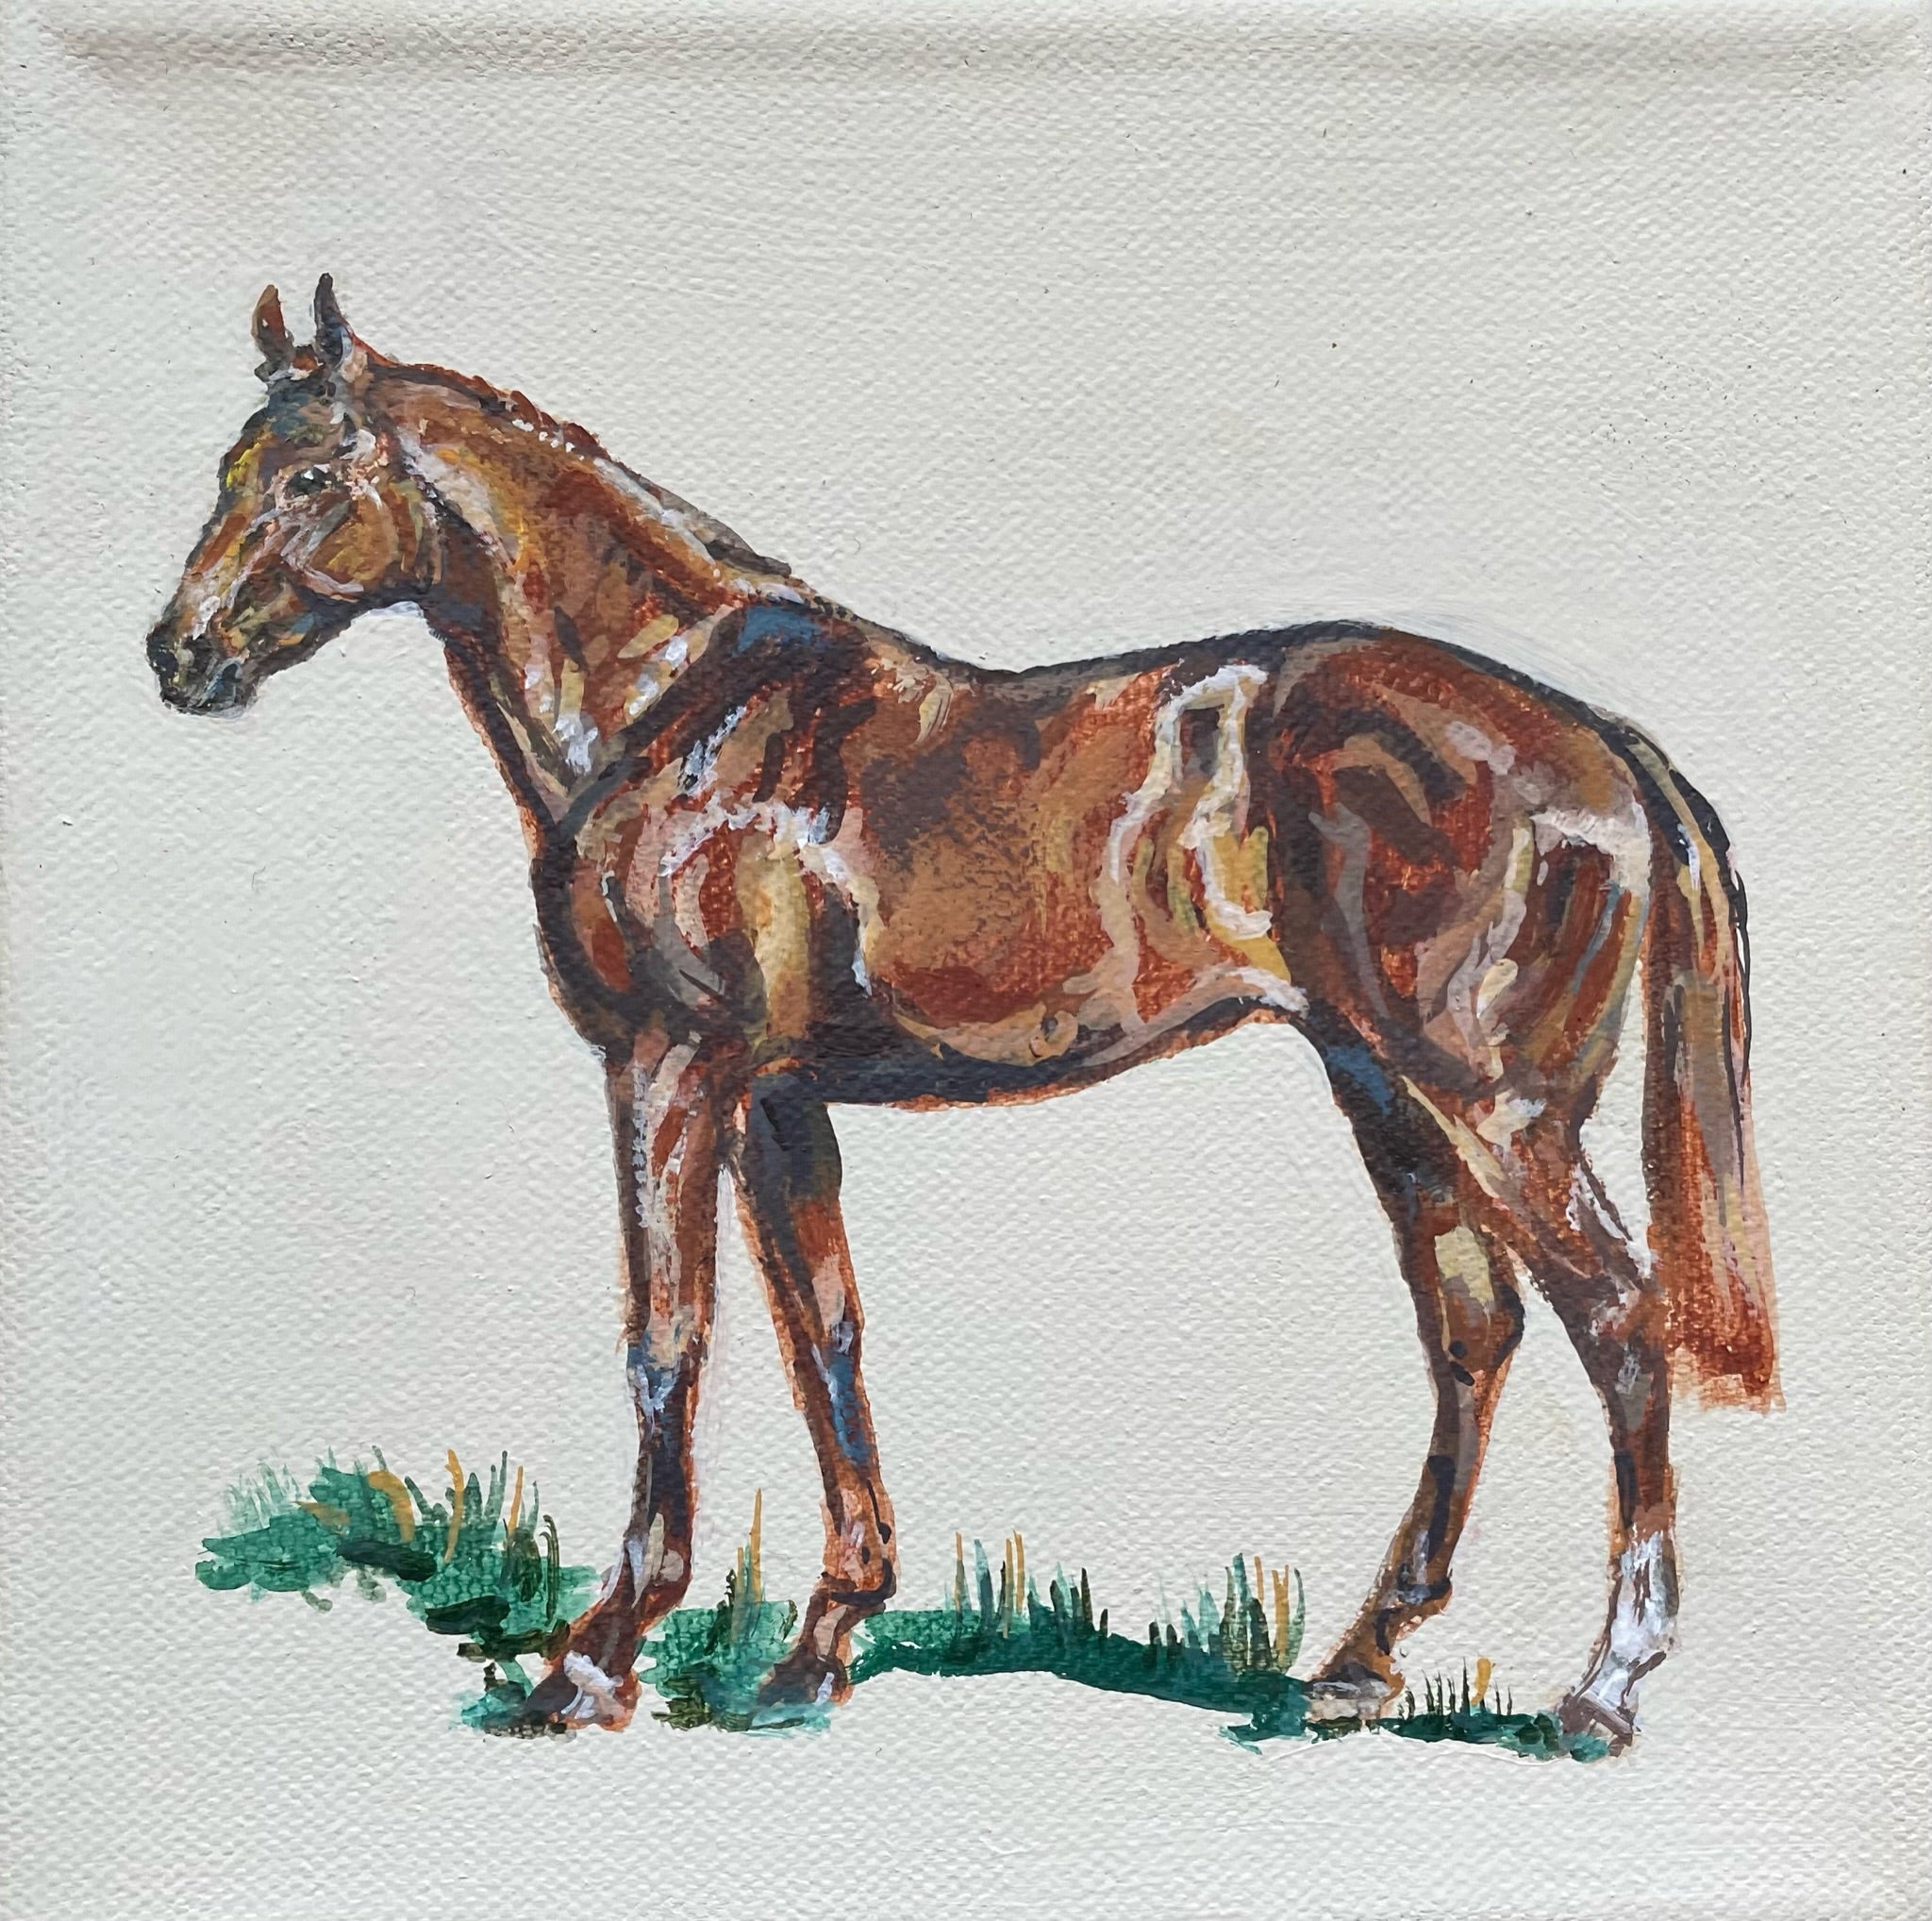 Chestnut Horse - 15cm x 15cm mini paintings depicting various countryside subjects.